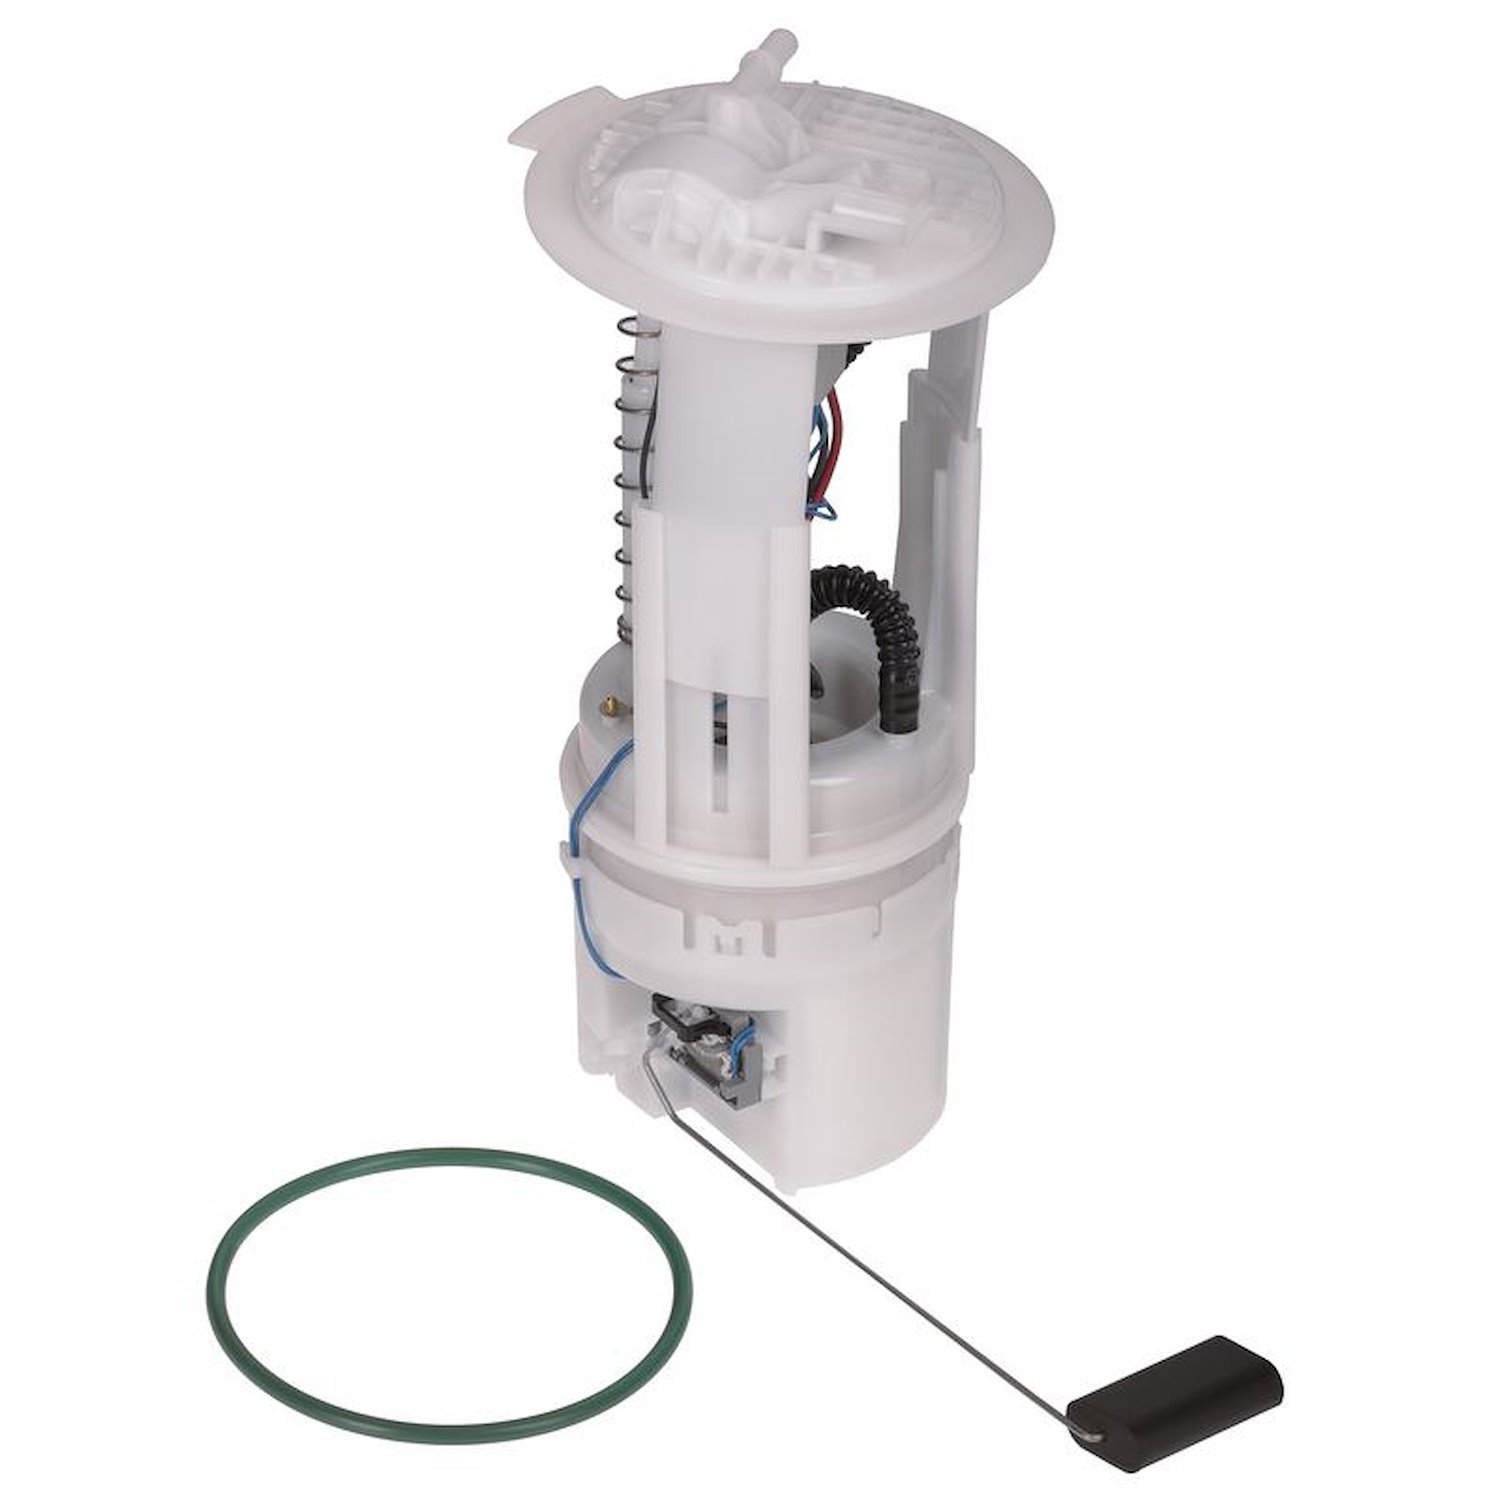 OE Chrysler/Dodge/Jeep Replacement Fuel Pump Module Assembly for 2005-2006 Jeep Wrangler